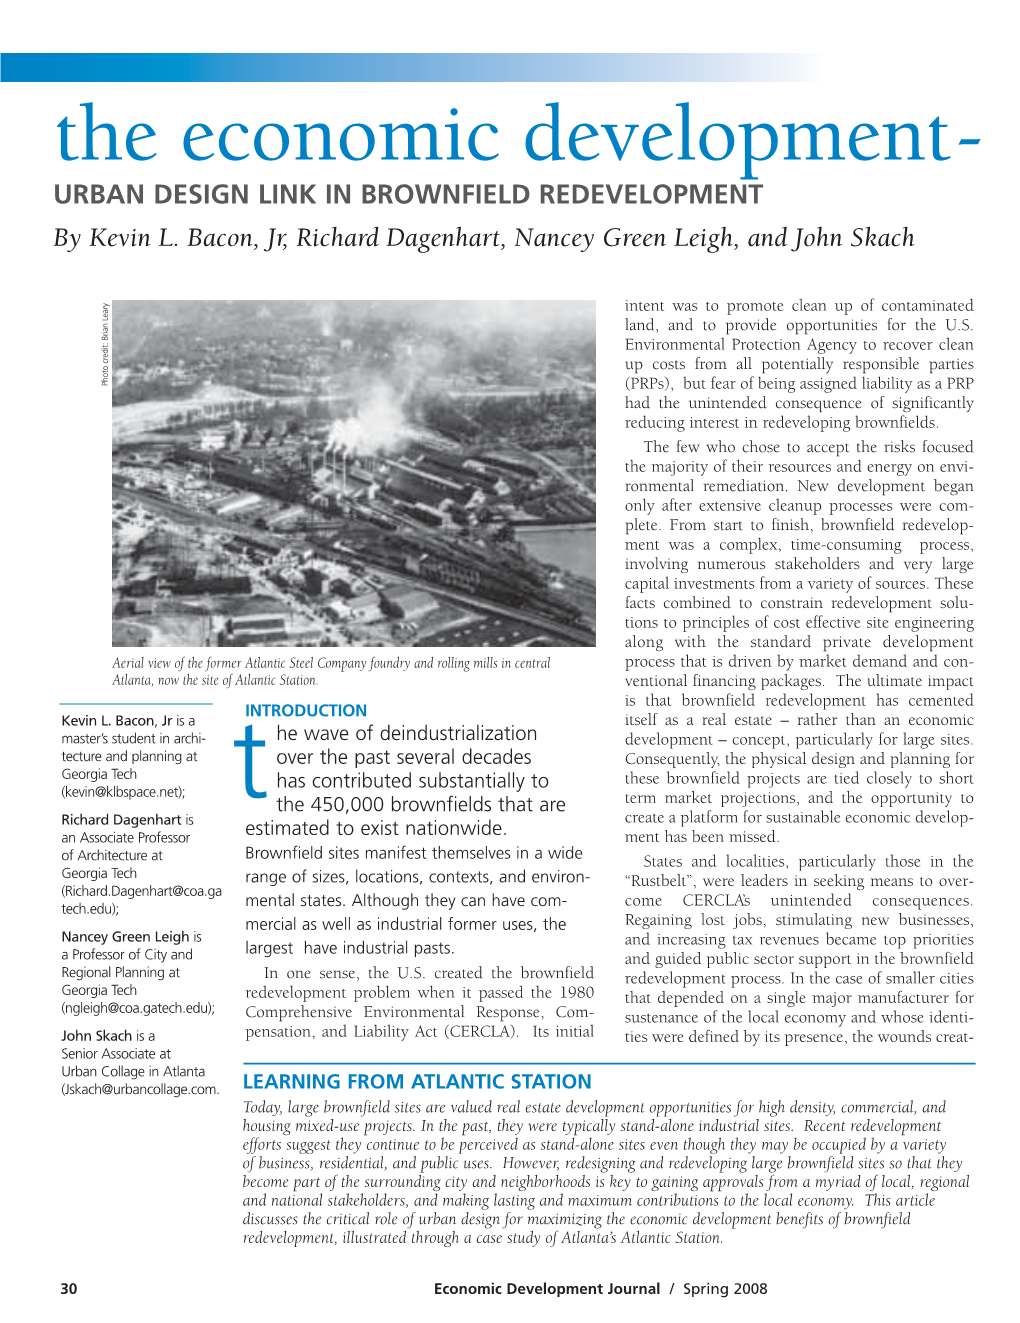 The Economic Development- URBAN DESIGN LINK in BROWNFIELD REDEVELOPMENT by Kevin L